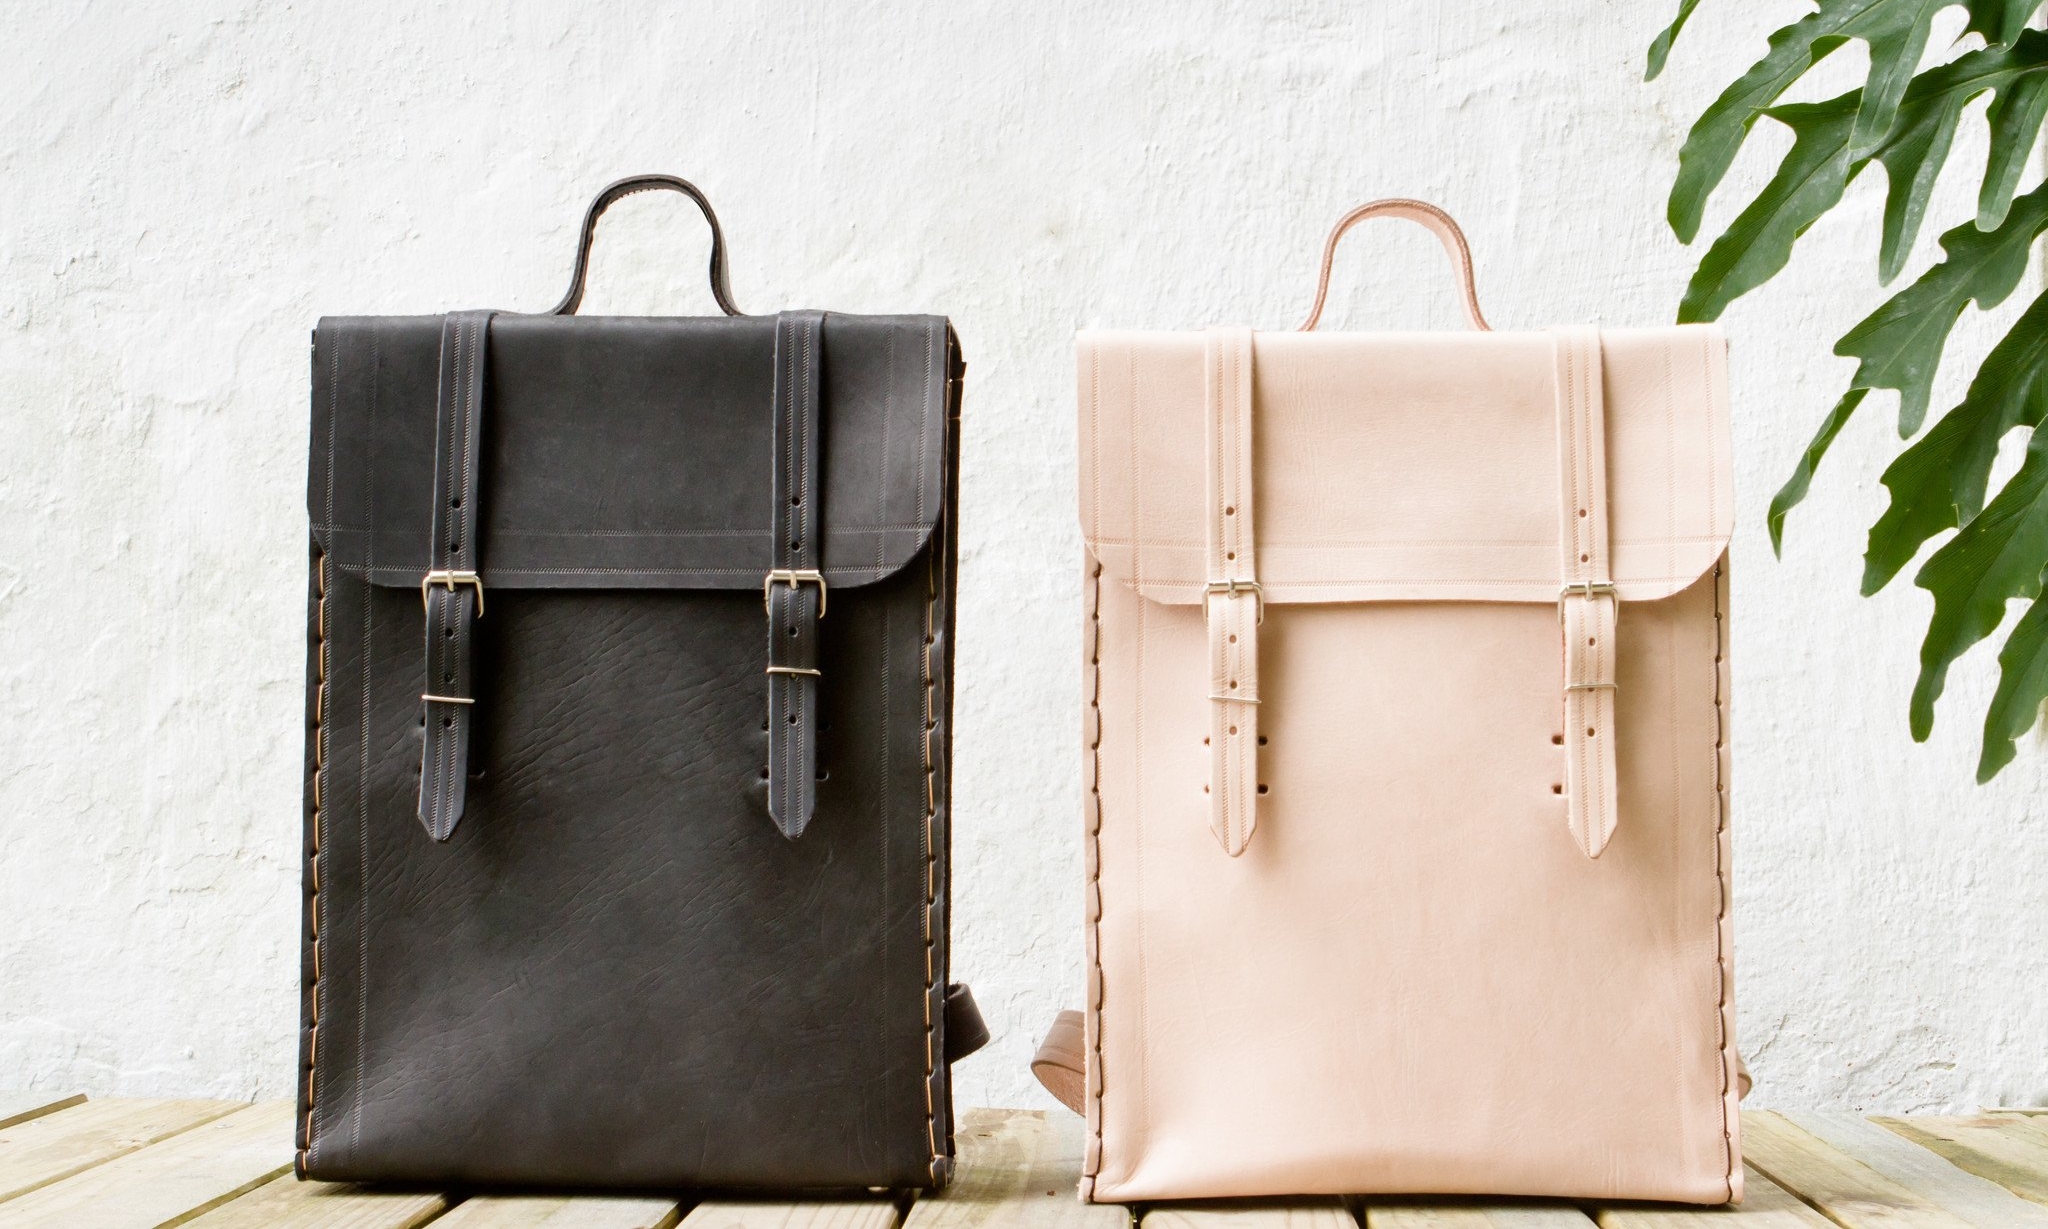  The handmade leather backpacks from independent designer  Laura Pereira . 